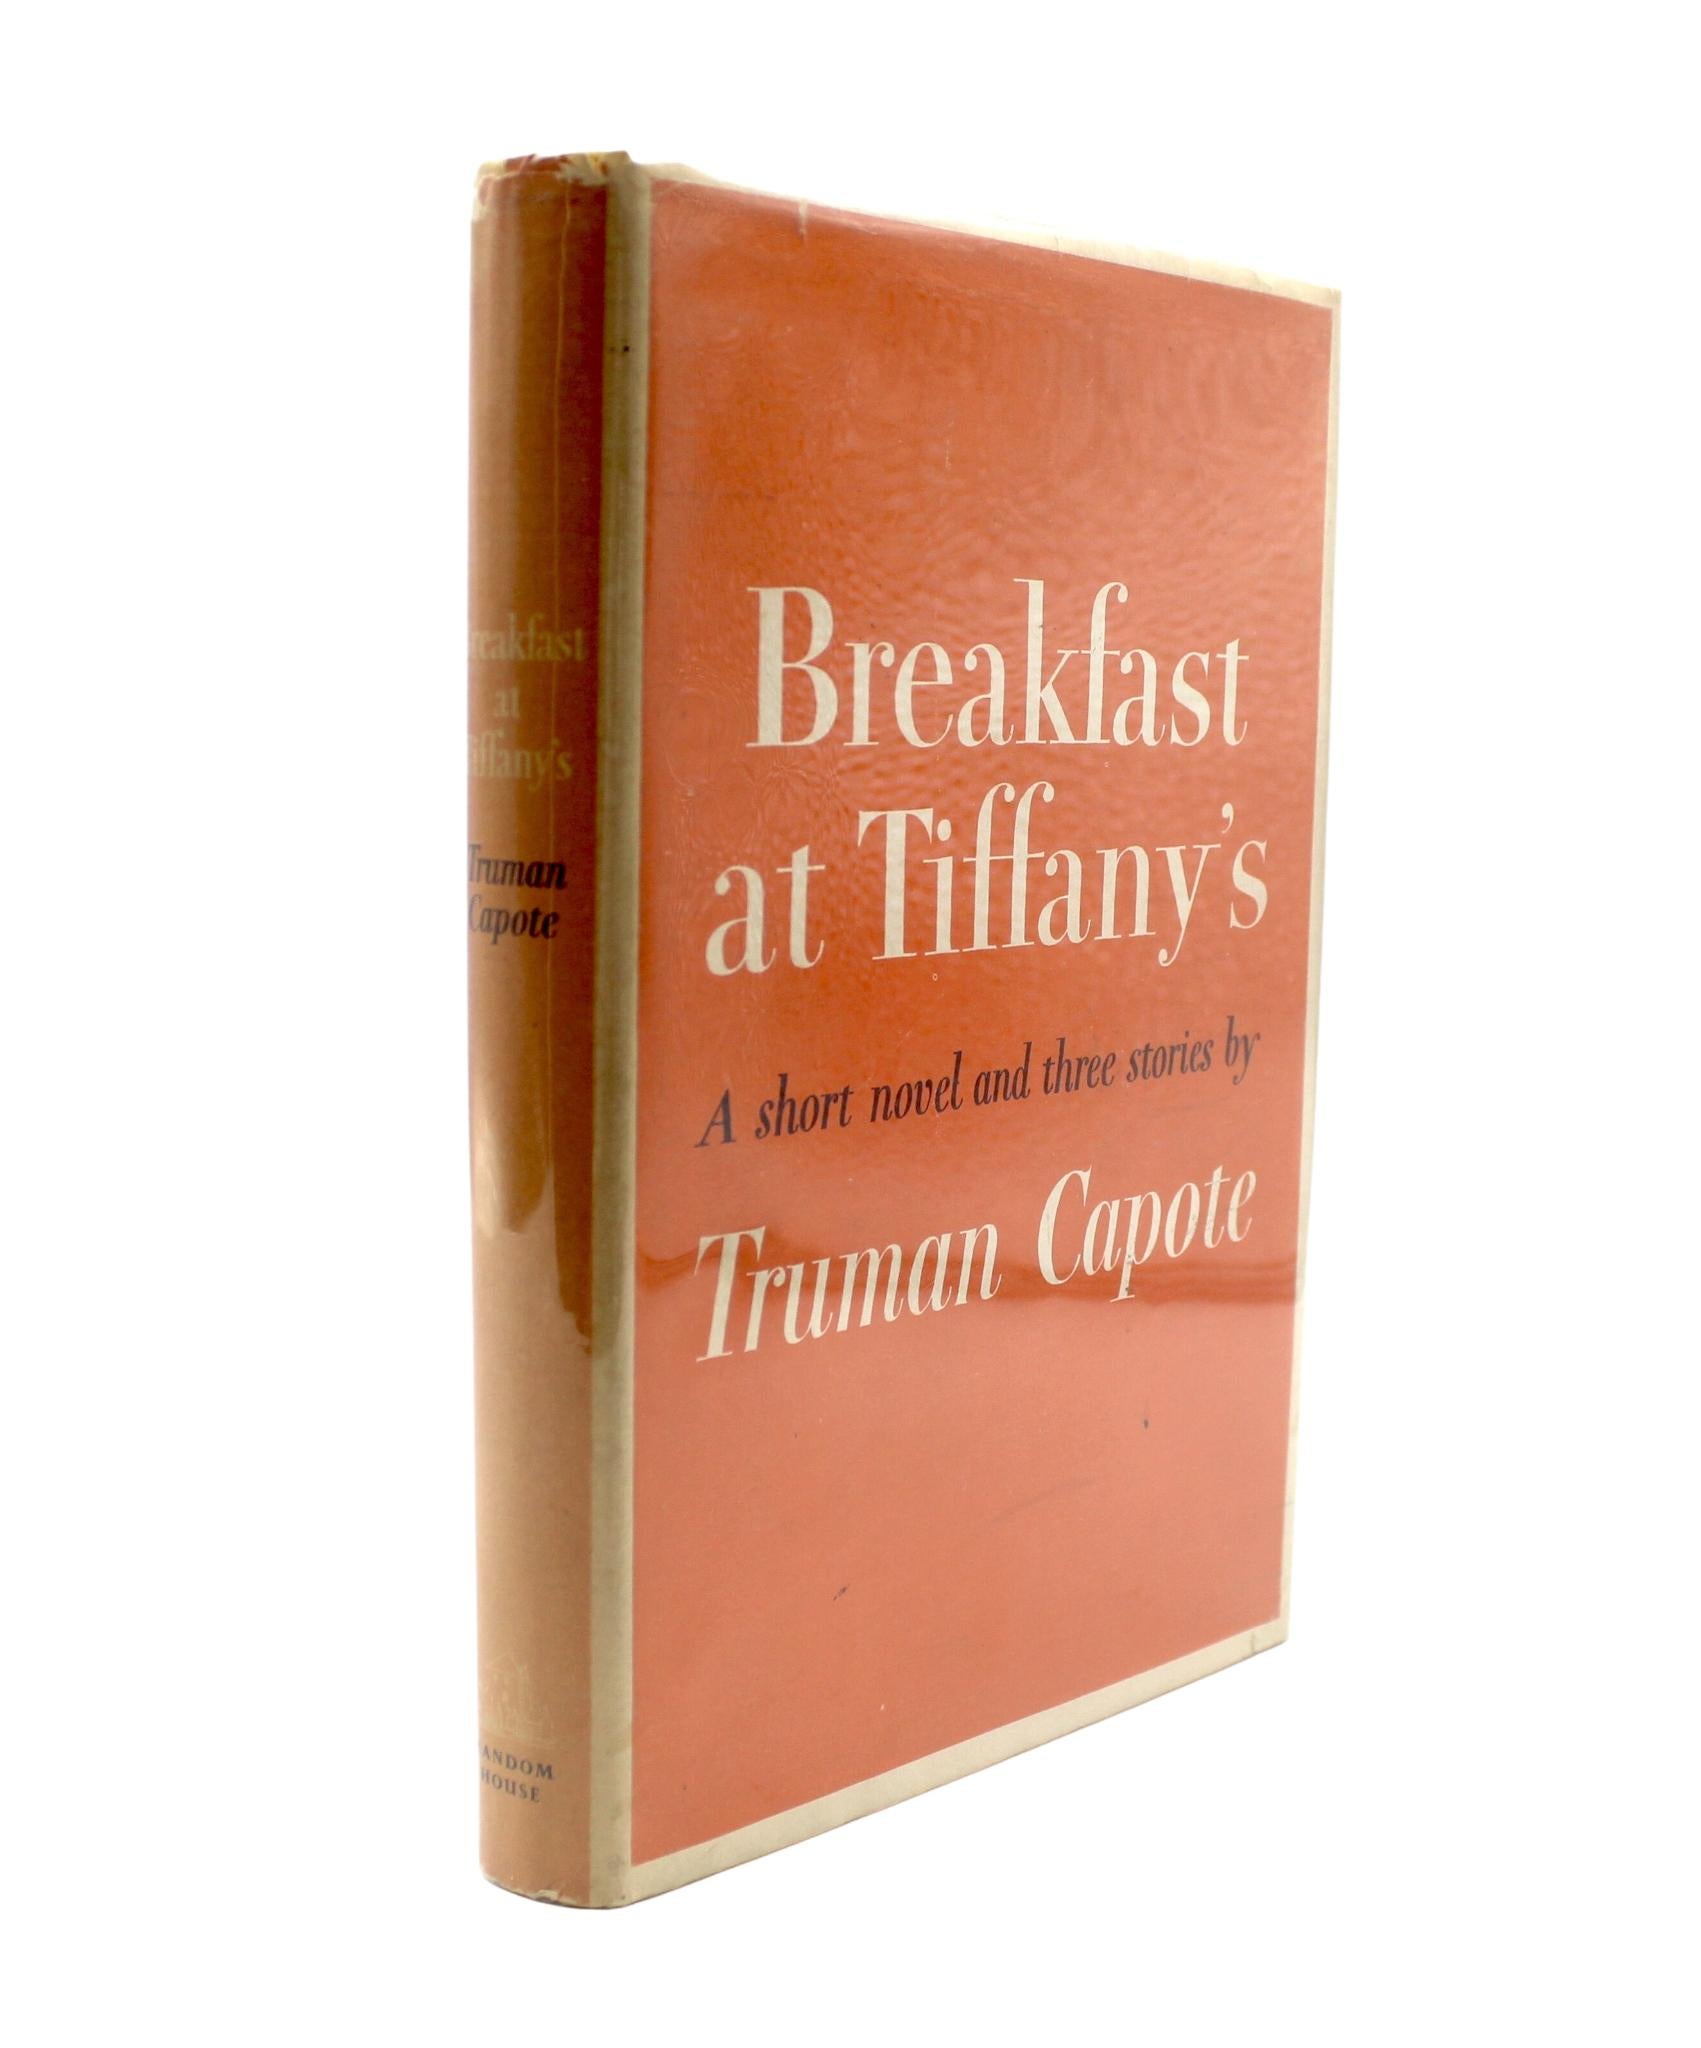 Capote, Truman. Breakfast at Tiffany's: A short novel and three stories. New York: Random House, 1958. First edition, first issue printing. Signed by Truman Capote. In the original publisher’s orange first issue dust jacket and yellow cloth binding.